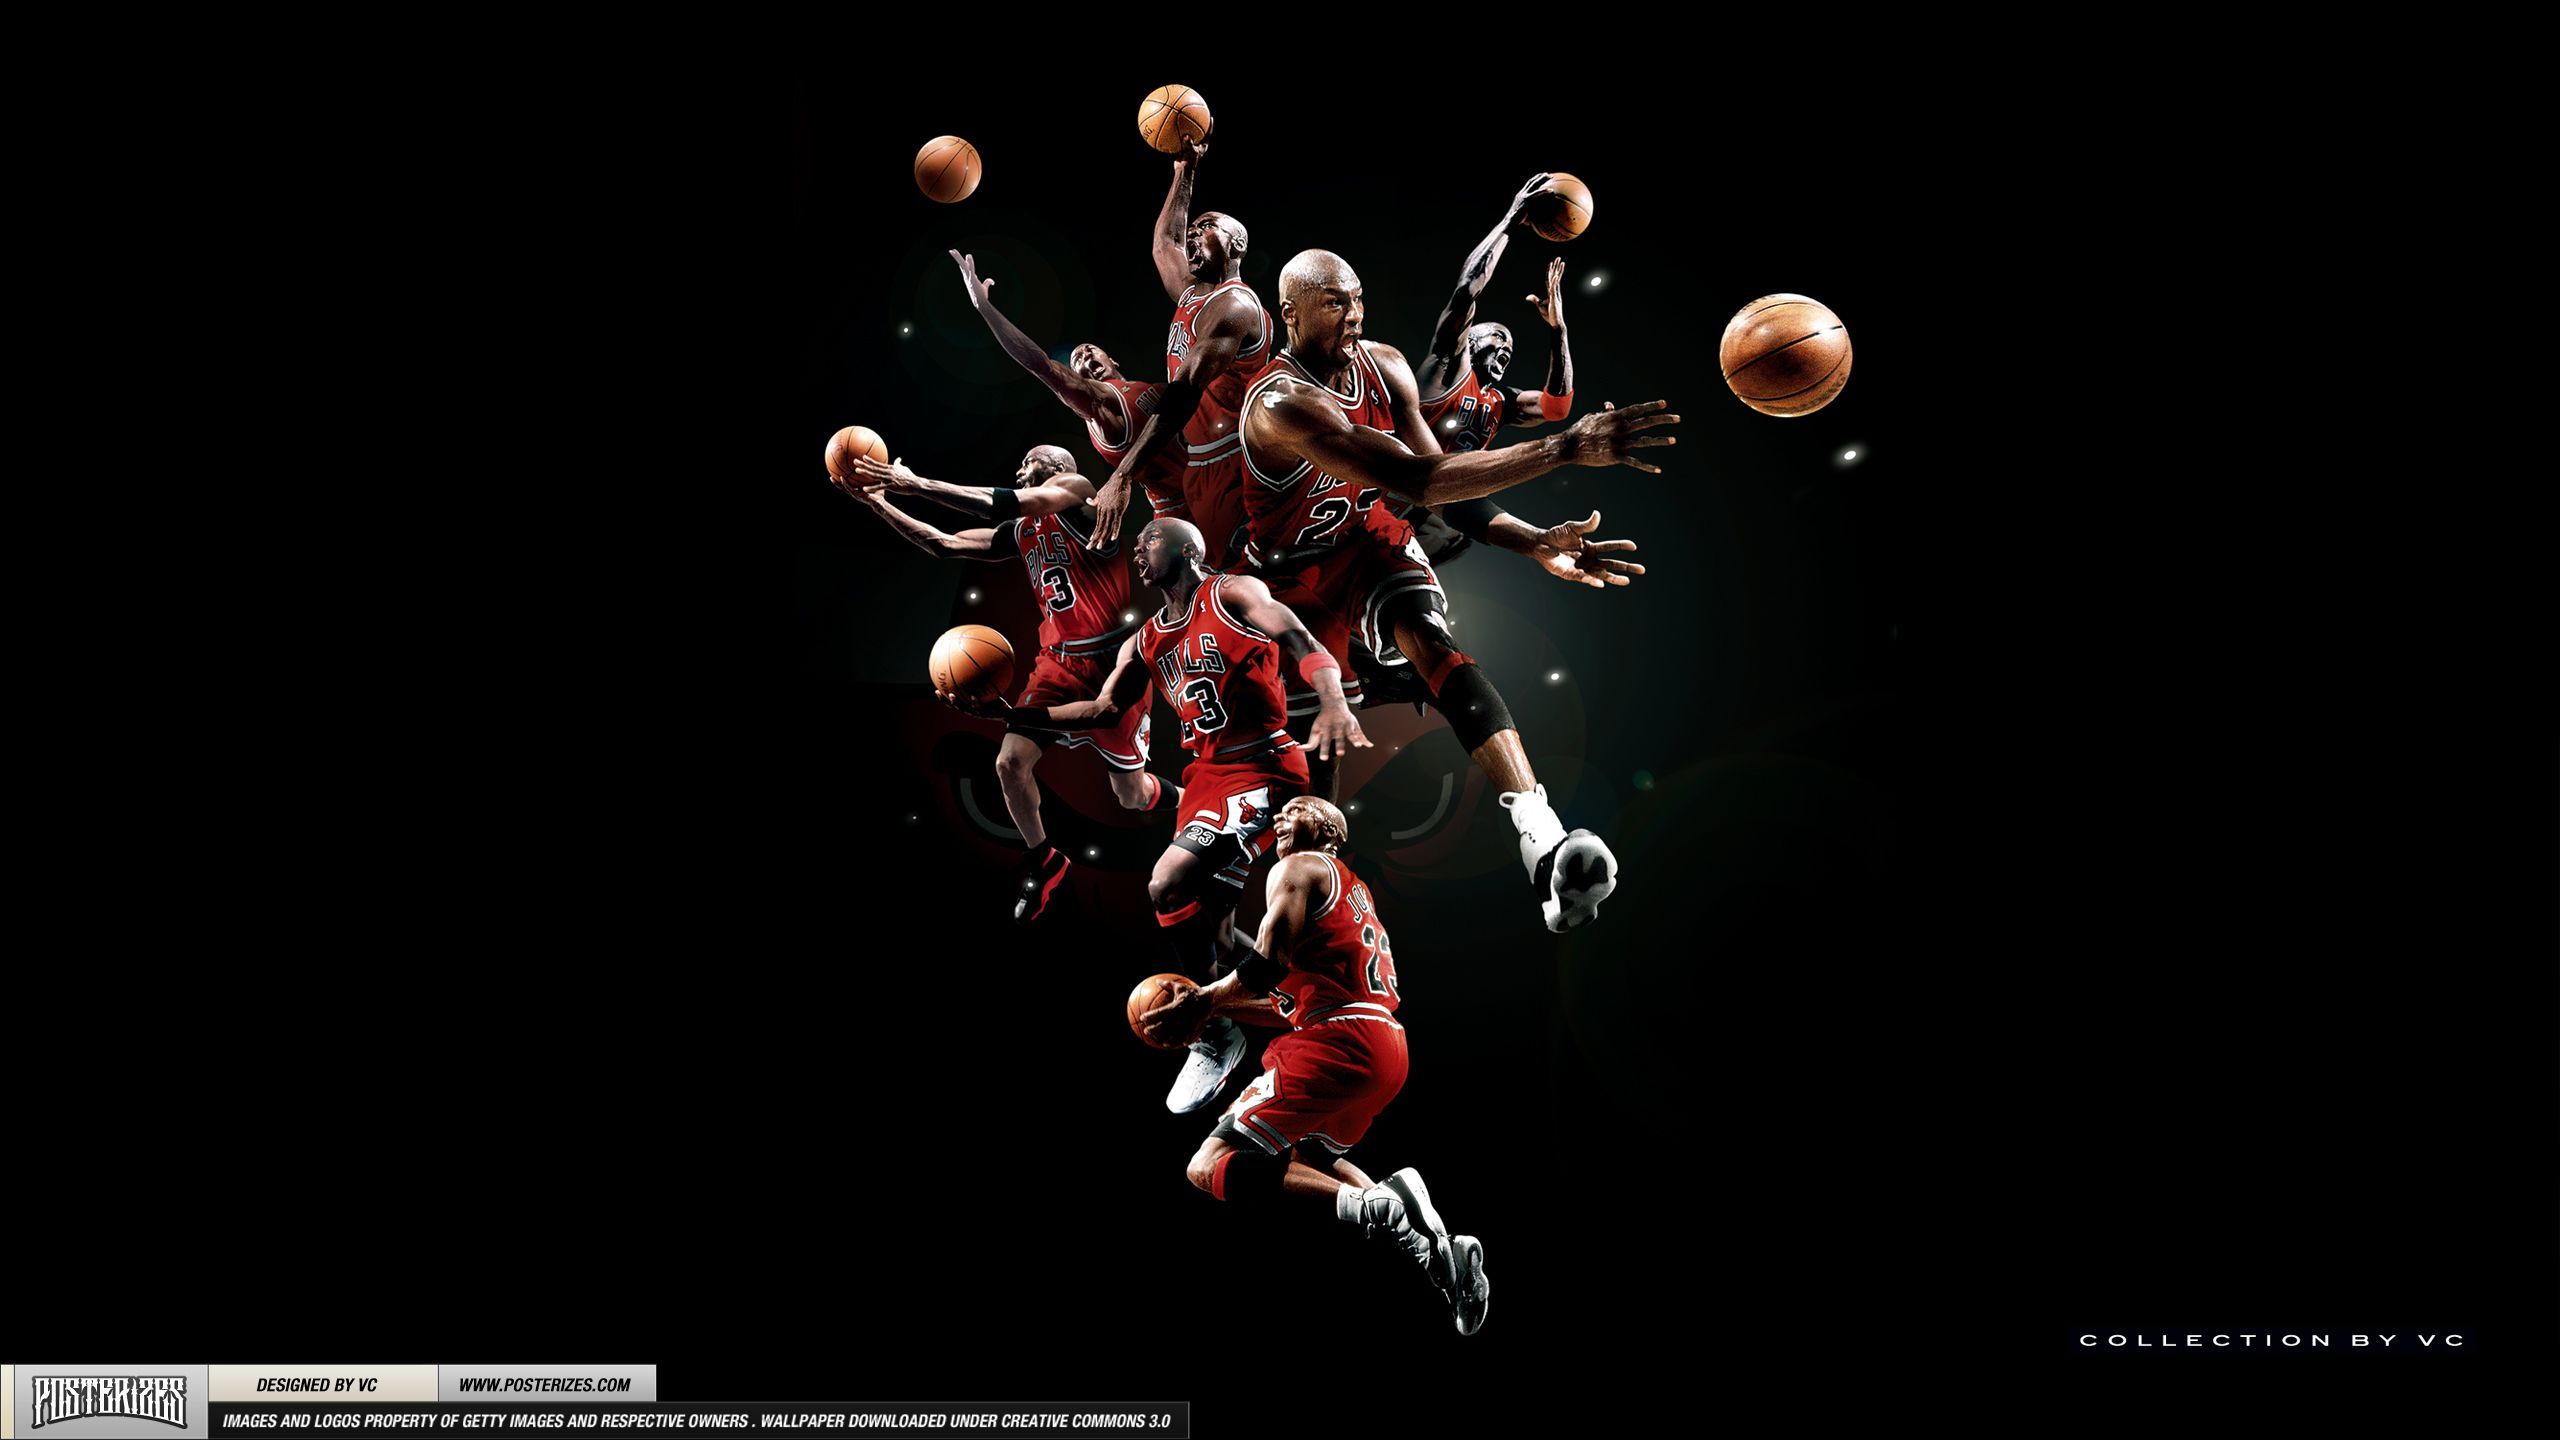 Michael Jordan Wallpapers High Resolution and Quality Download